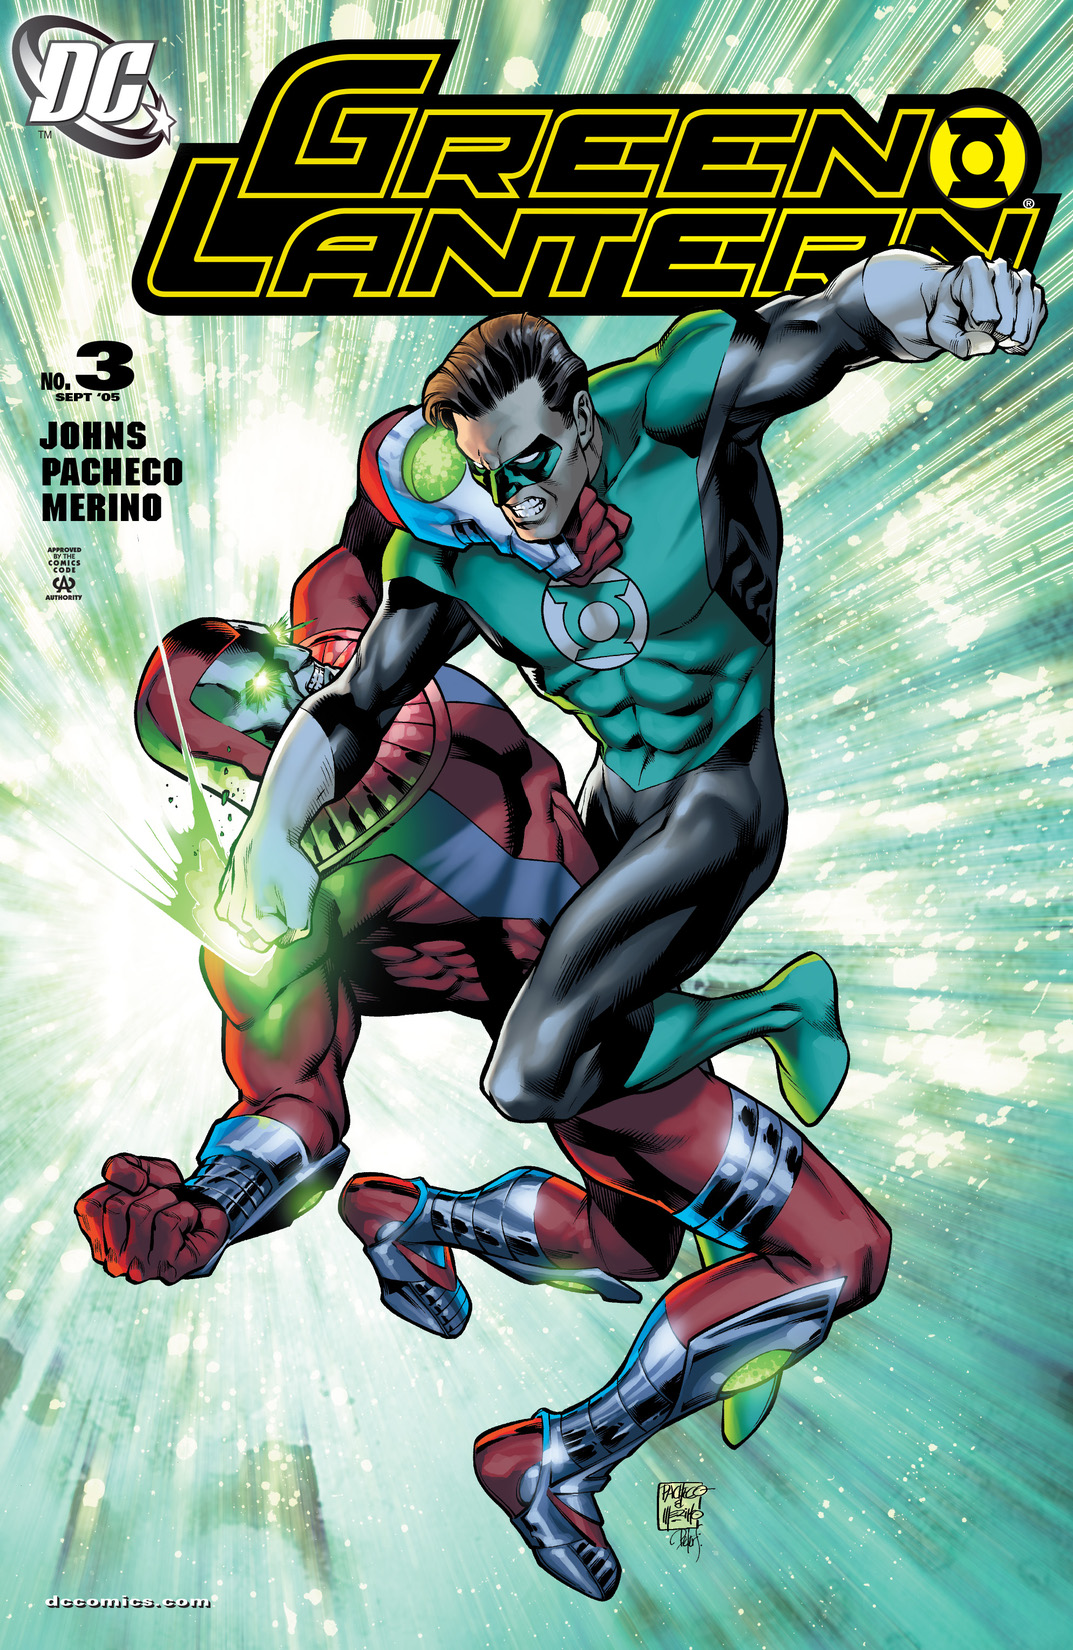 Green Lantern (2005-2011) #3 preview images